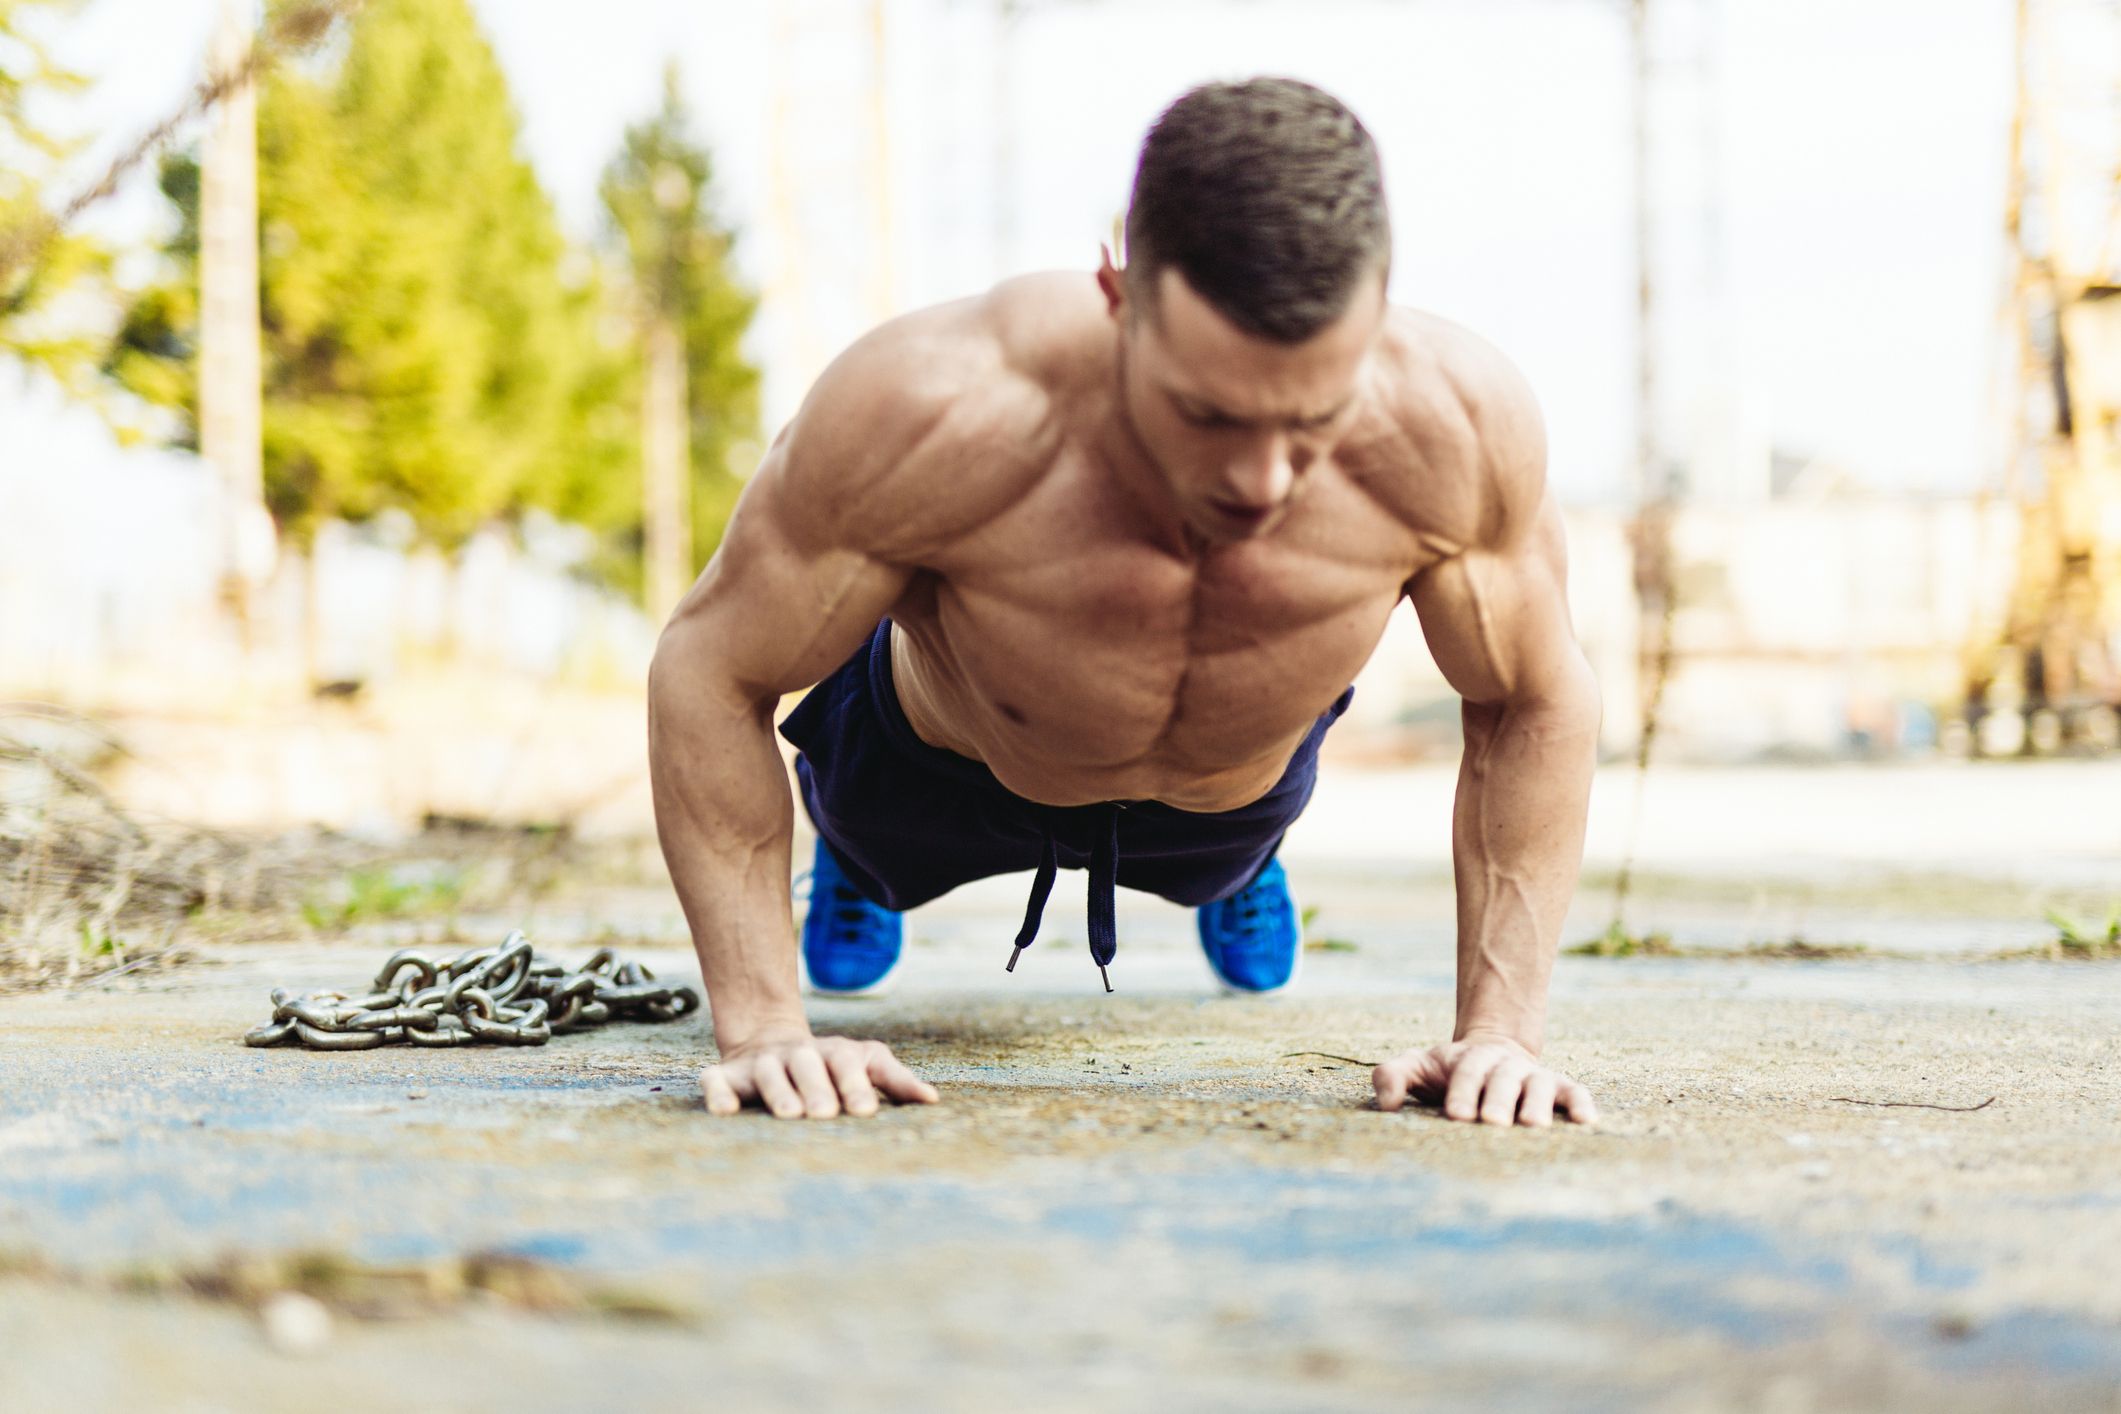 Push Ups VS Bench Press – Which is better or more effective?